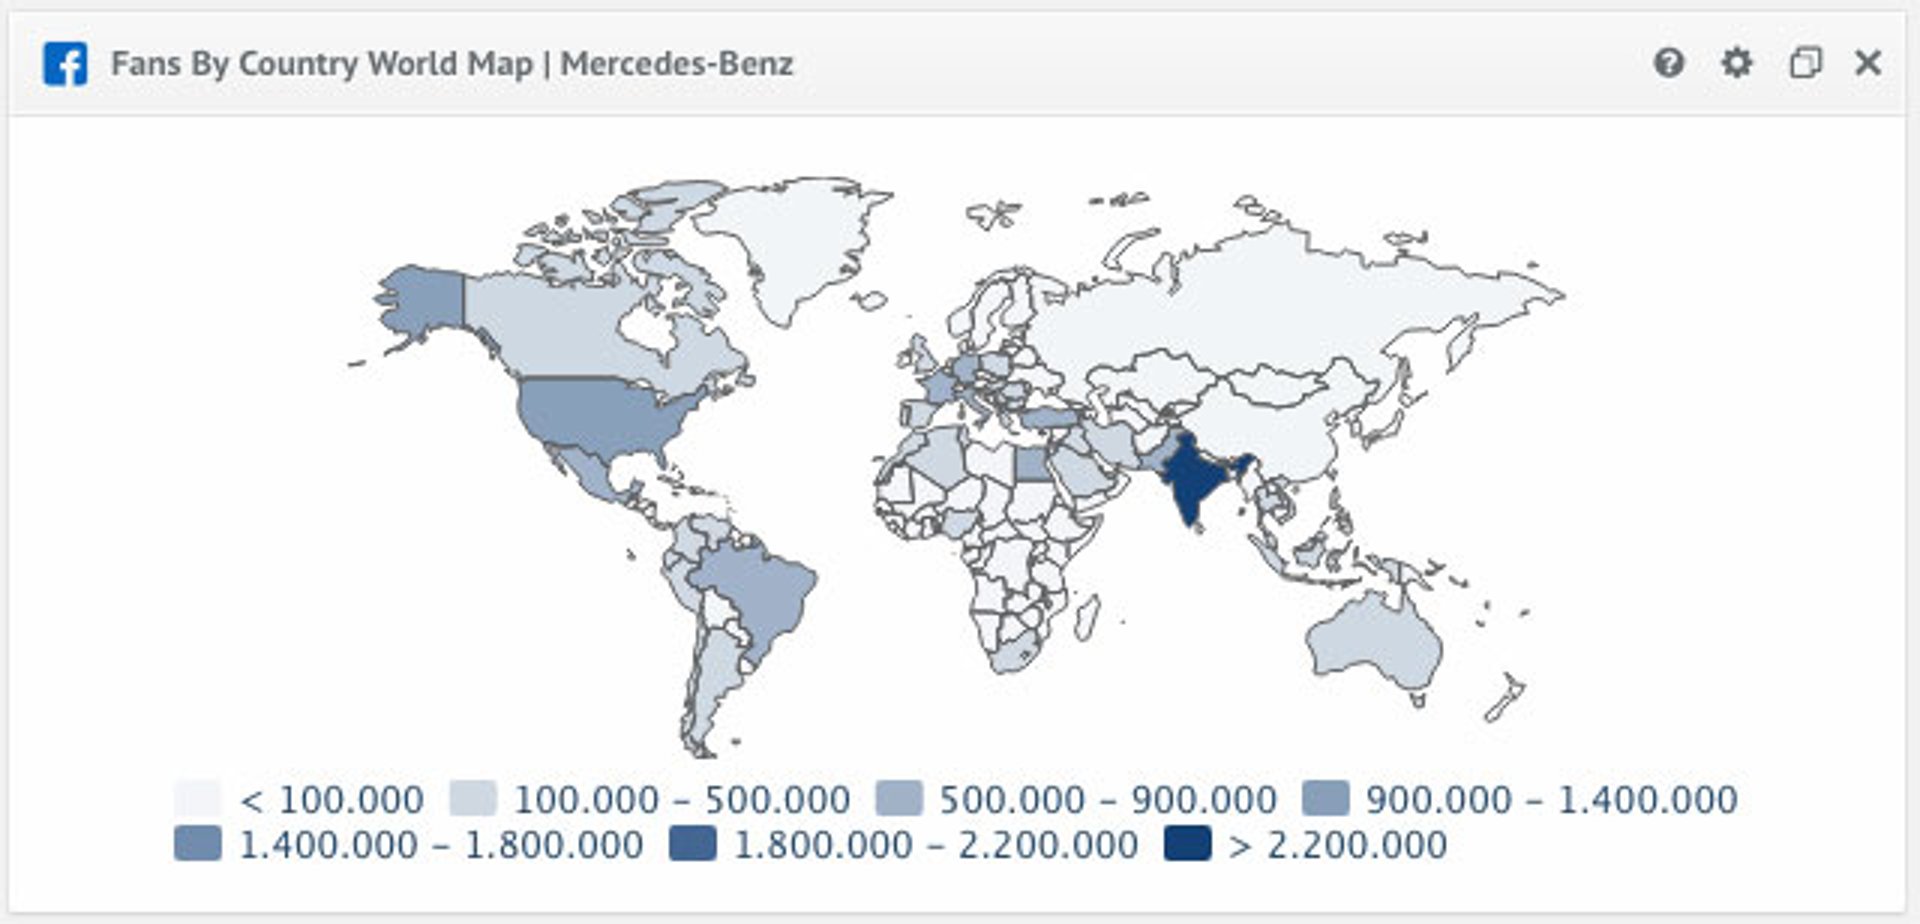 Fans by Country World Map Mercedes Benz